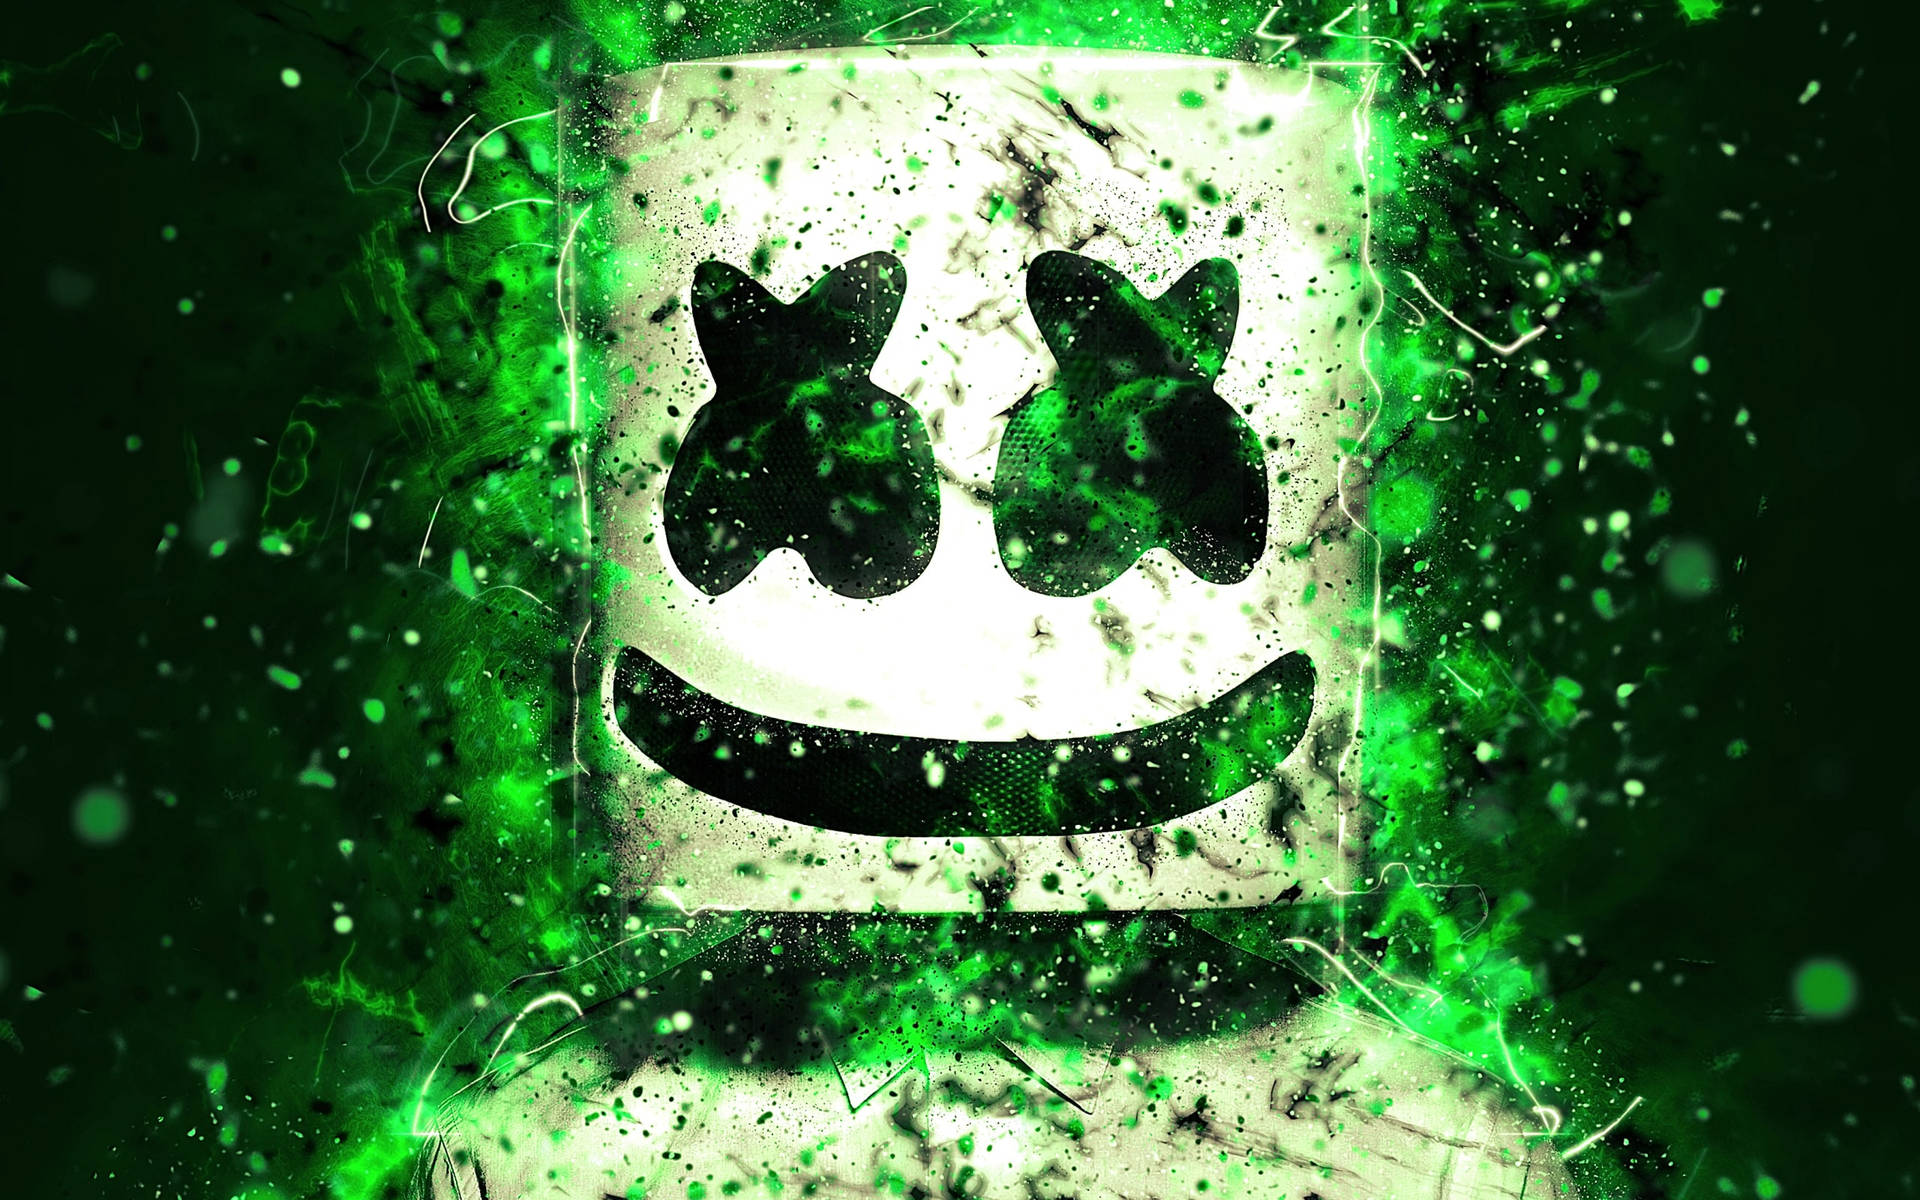 The iconic image of Marshmello from his single 